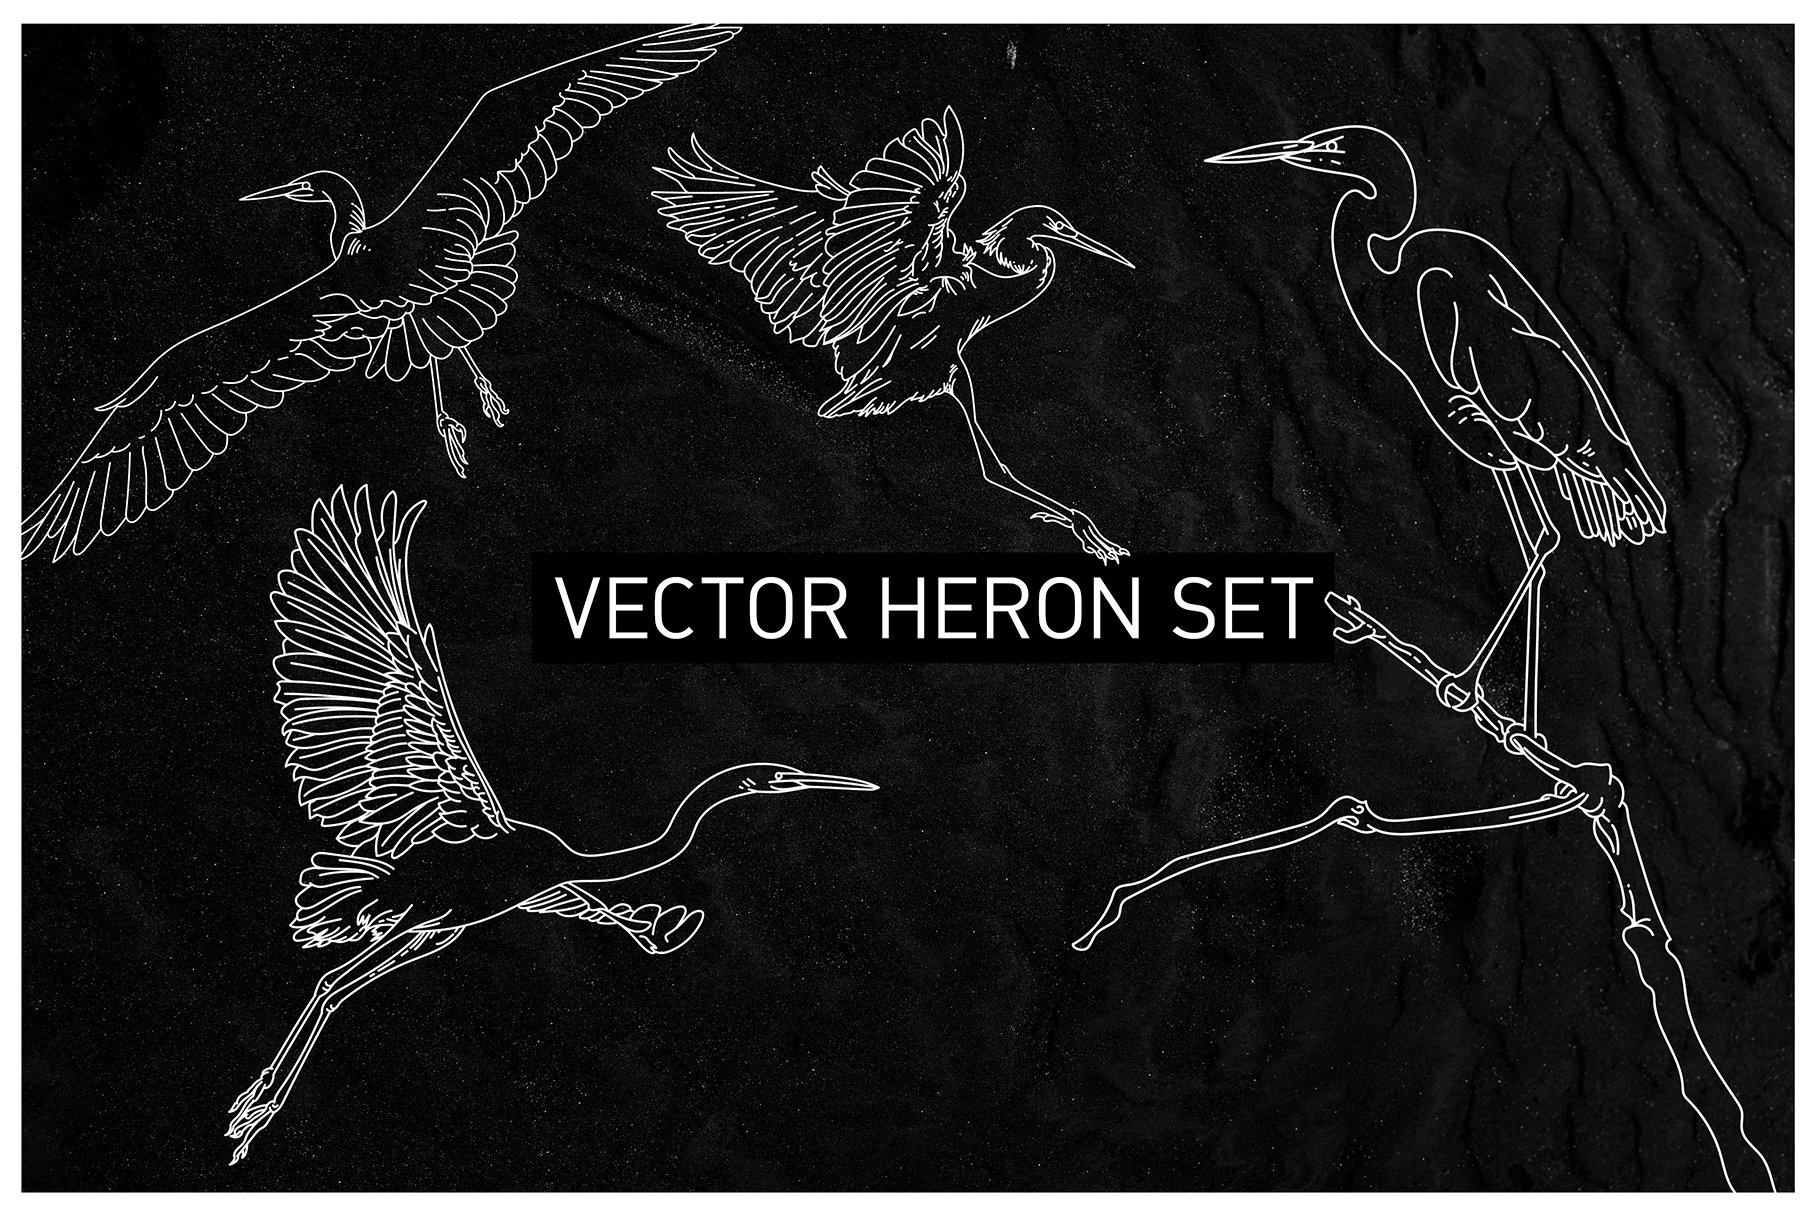 Vector Heron Set cover image.